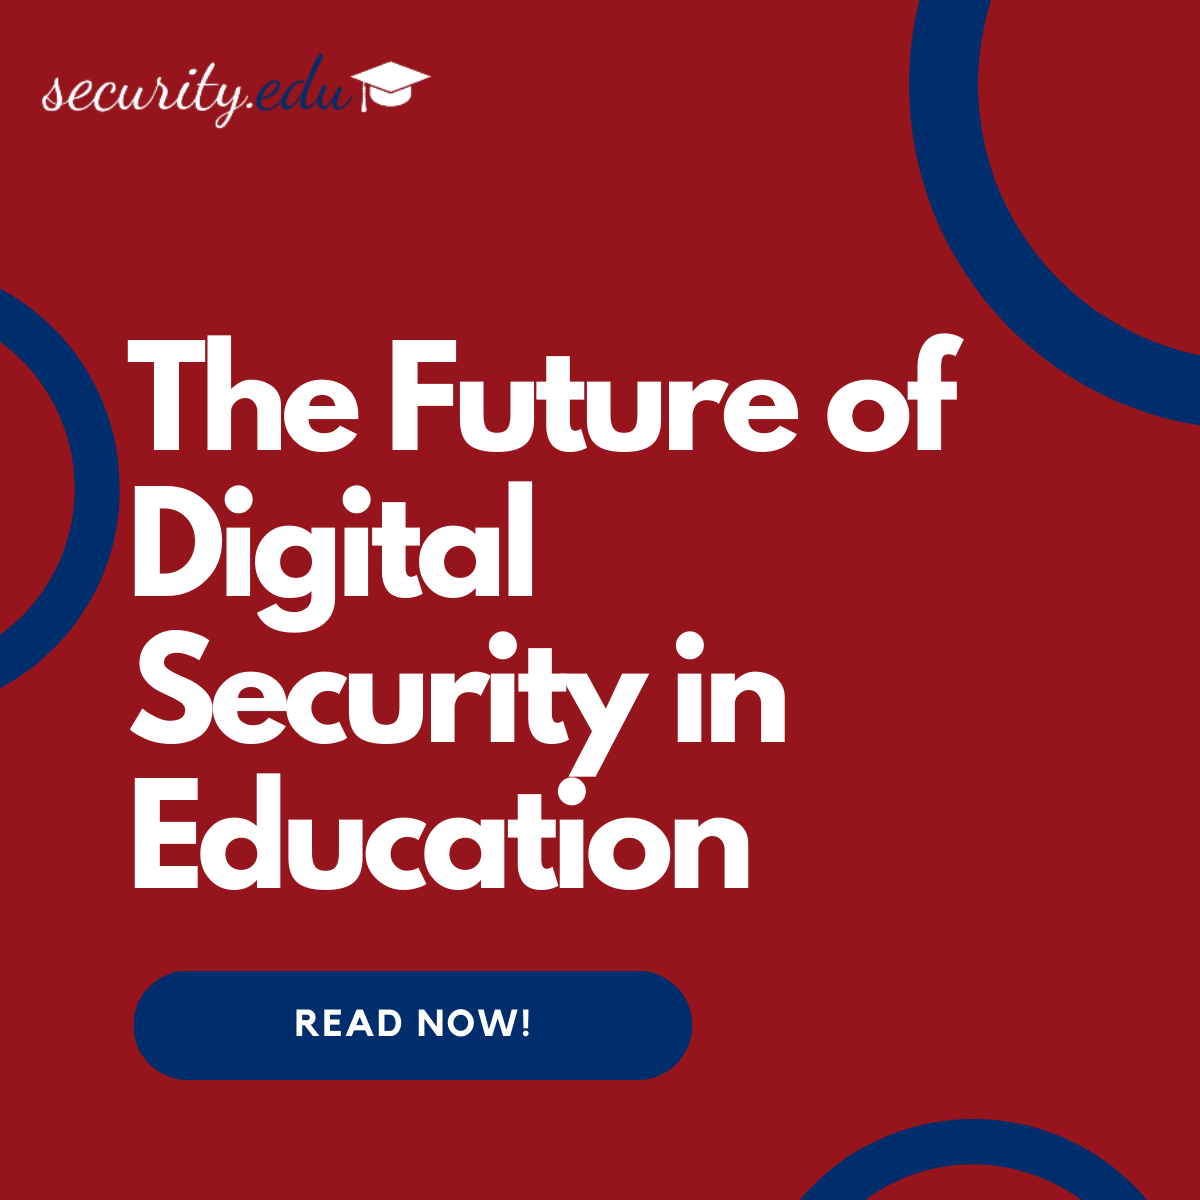 The future of digital security in education